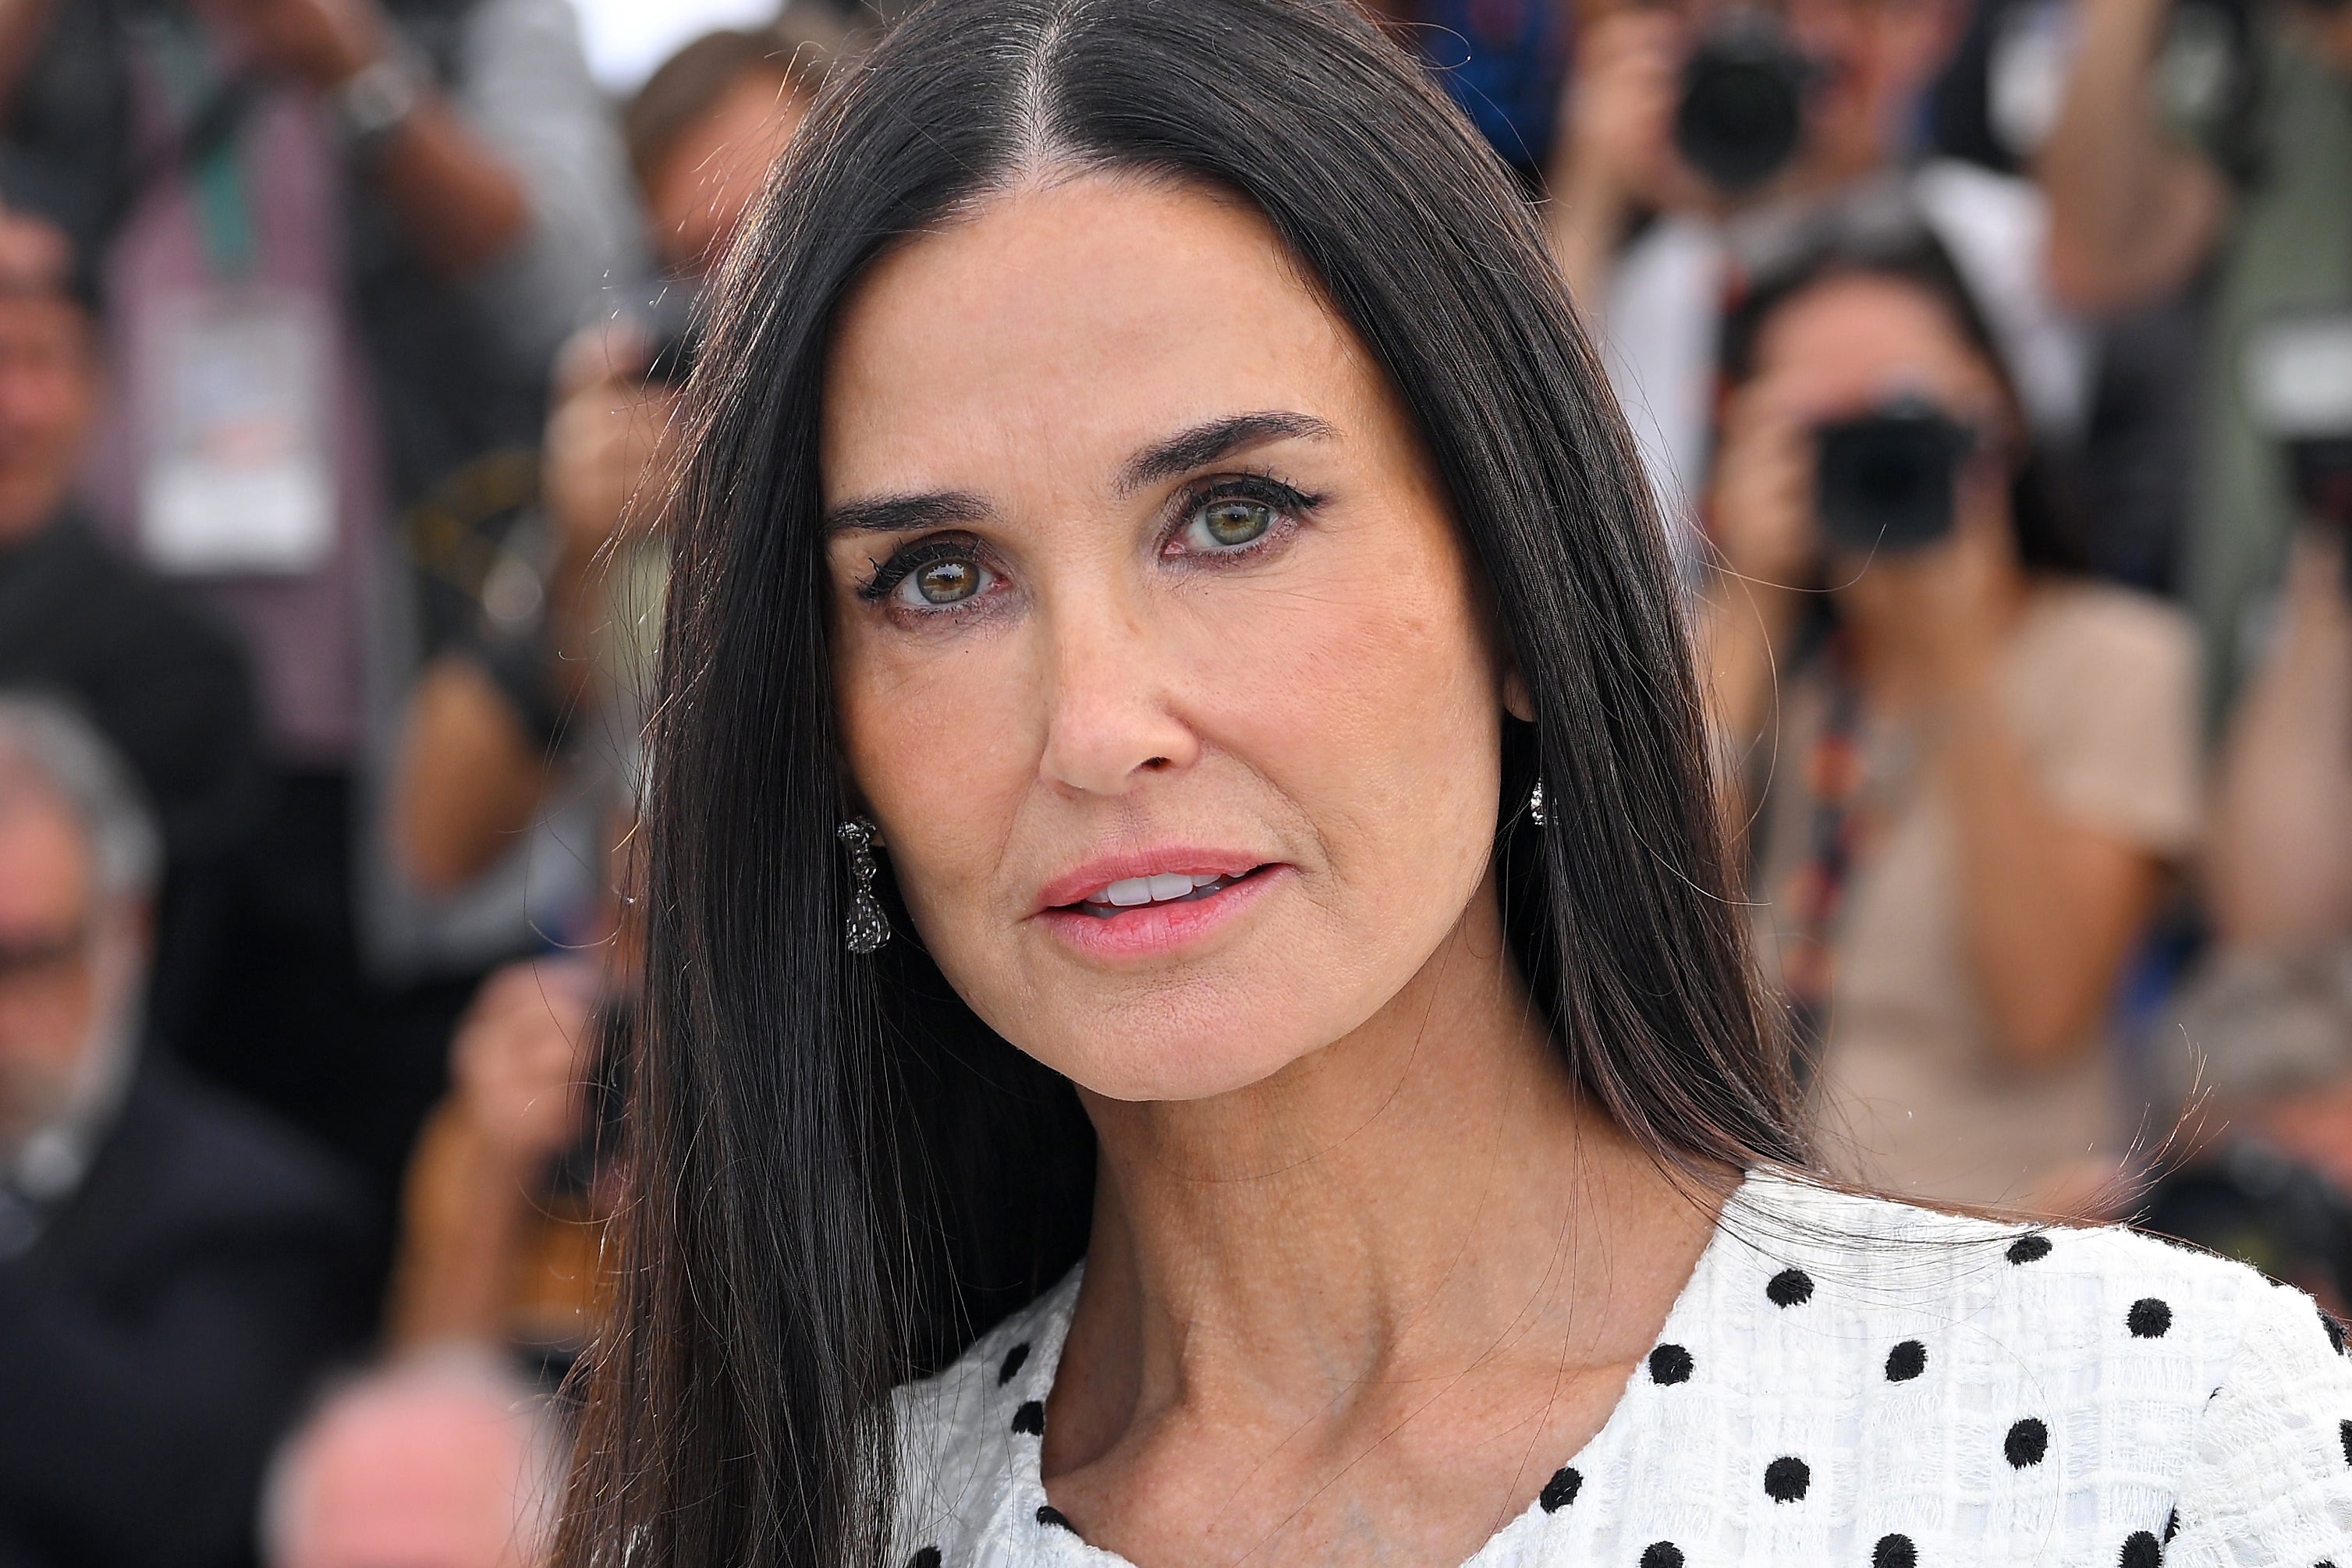 Demi Moore attends a photocall for her new film ‘The Substance’ at the Cannes Film Festival